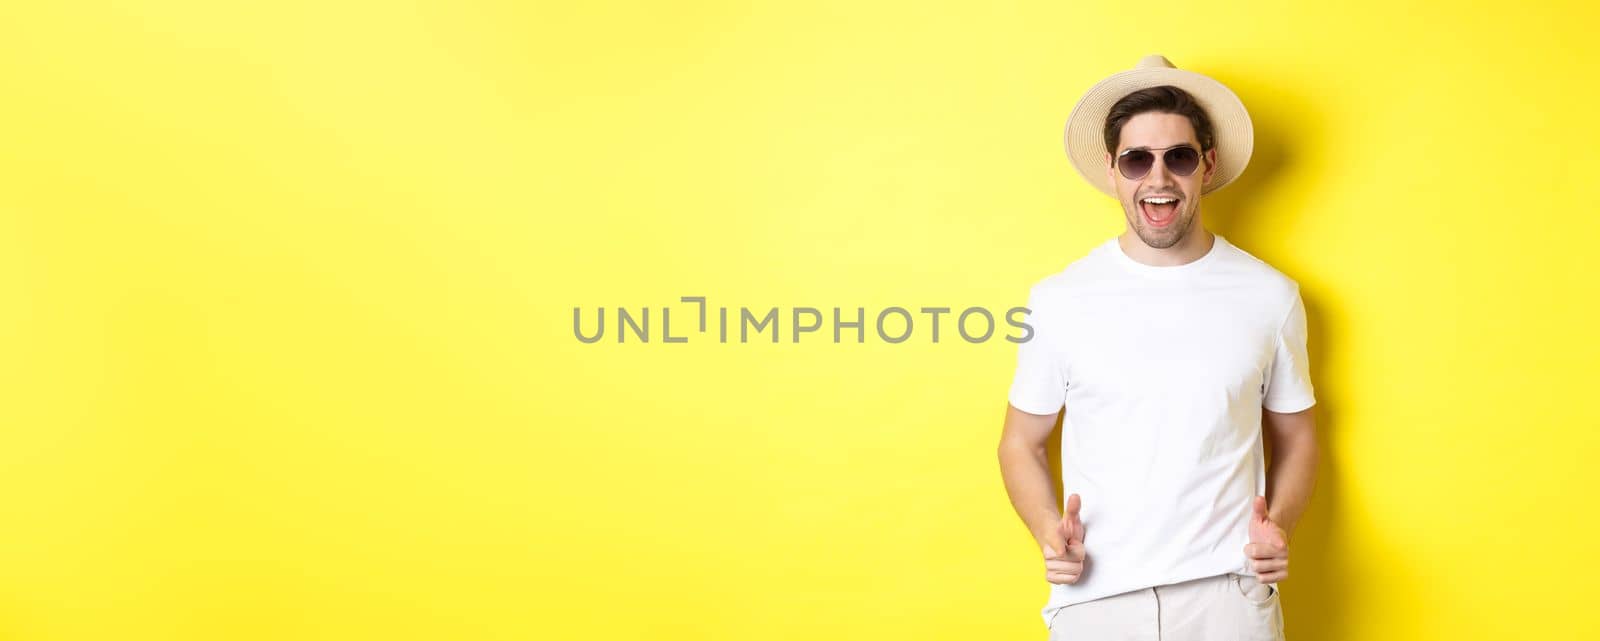 Confident and cheeky guy on vacation flirting with you, pointing finger at camera and winking, wearing summer hat with sunglasses, yellow background.